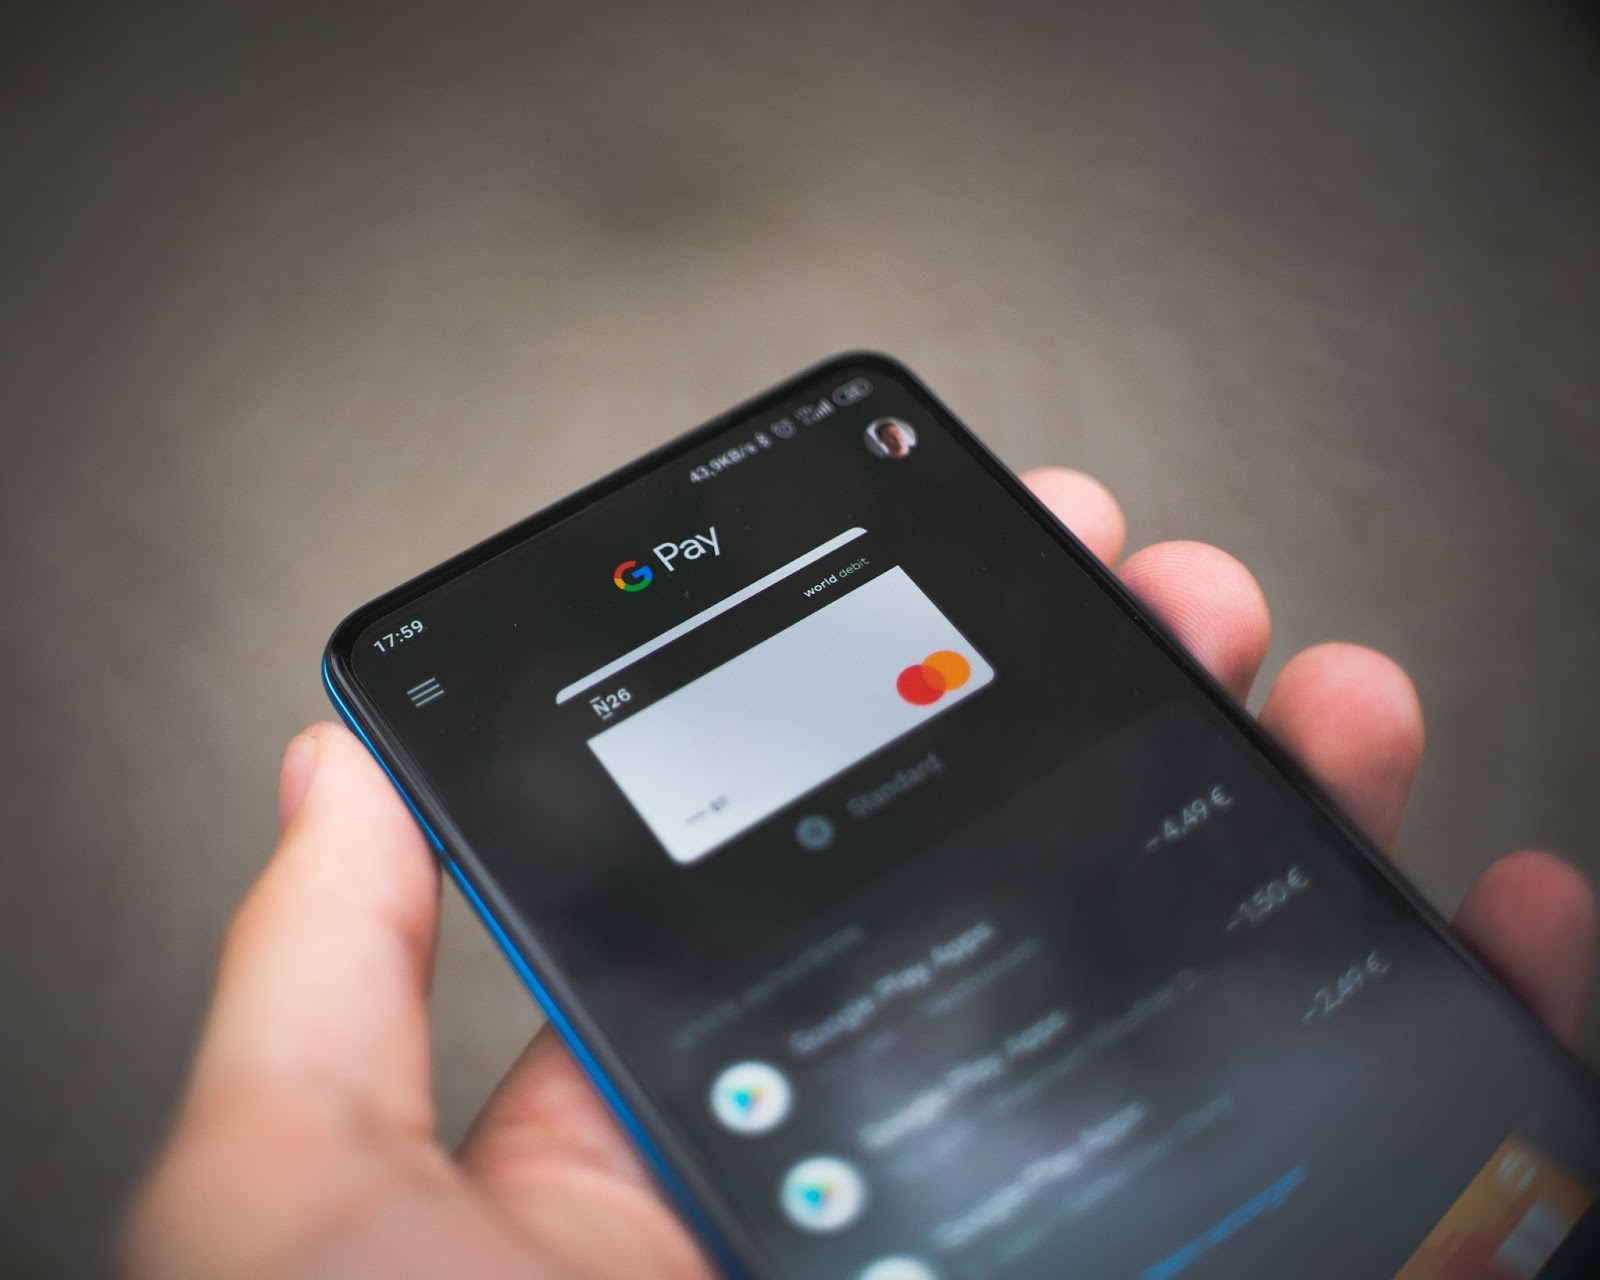 Close-up photo of a phone screen displaying the Google Pay user interface